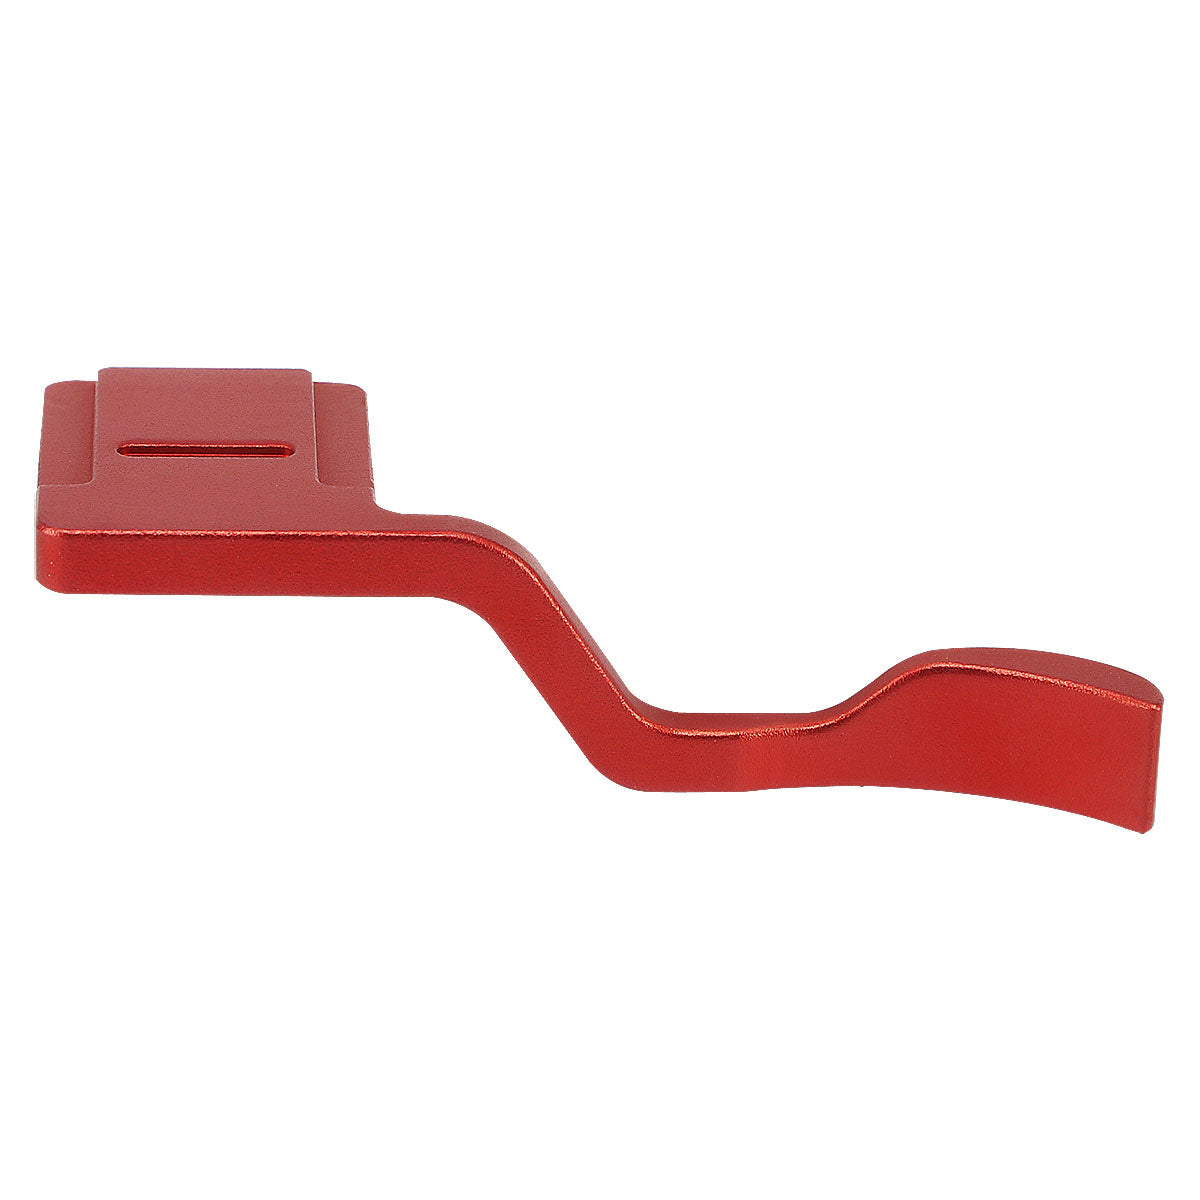 Haoge THB-XT30R Metal Hot Shoe Thumb Up Rest Hand Grip for Fujifilm Fuji X-T10 X-T20 X-T30 XT10 XT20 XT30 Camera Red